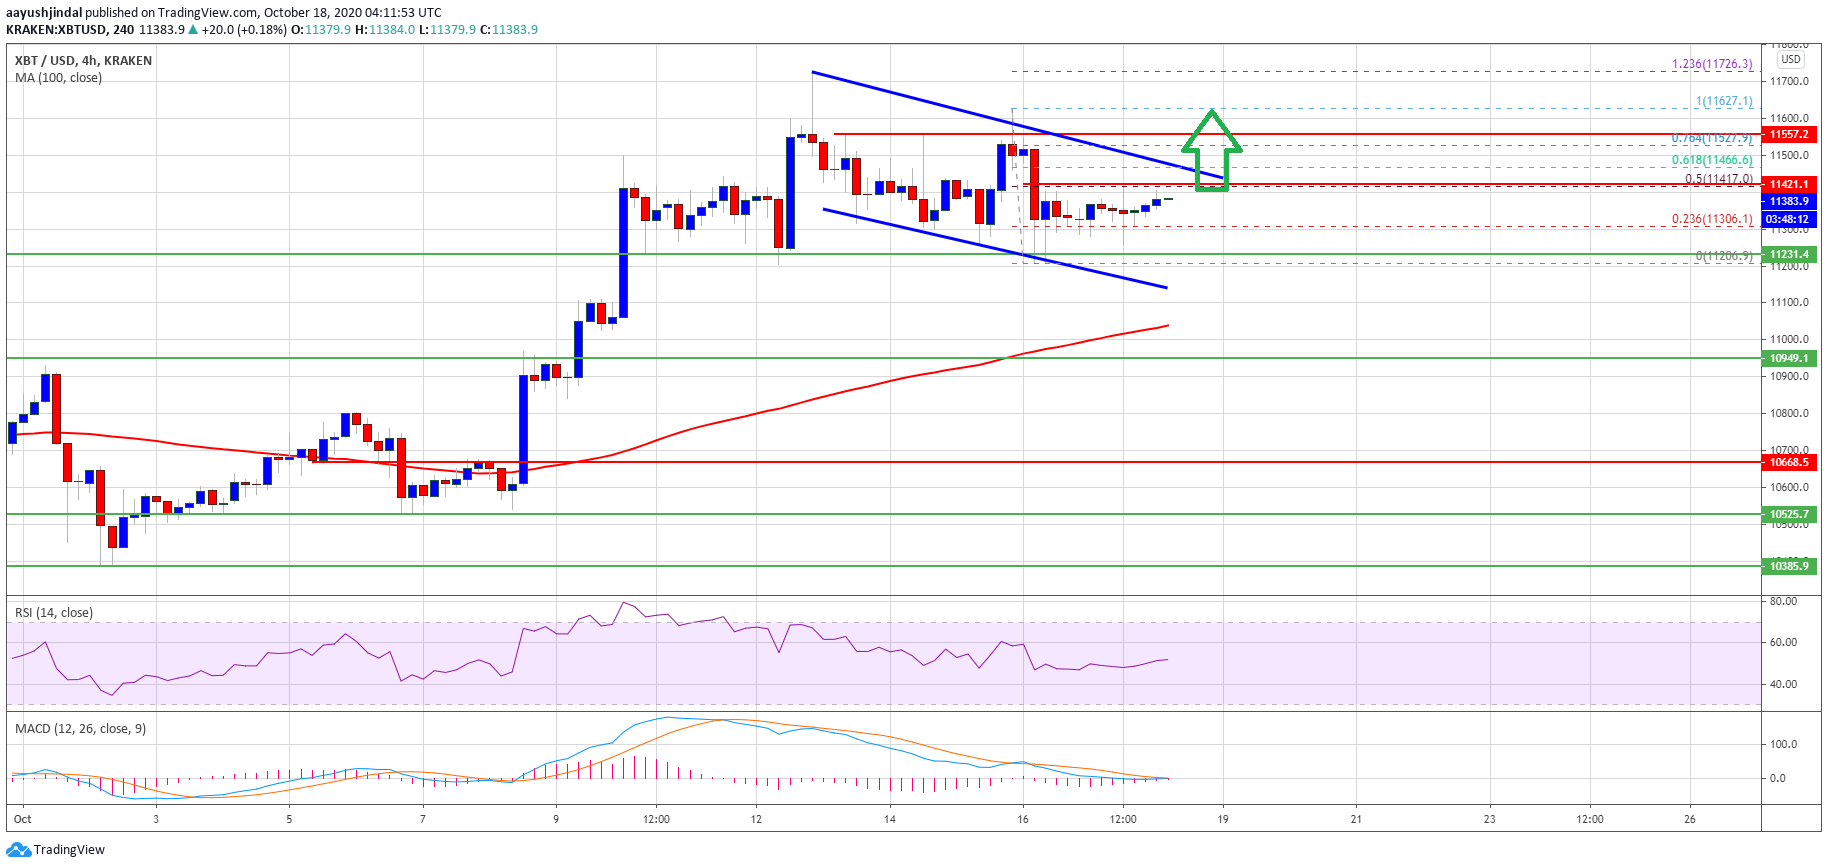 Bitcoin Key Indicators Suggest A Strengthening Case For Rally Above $11.5K